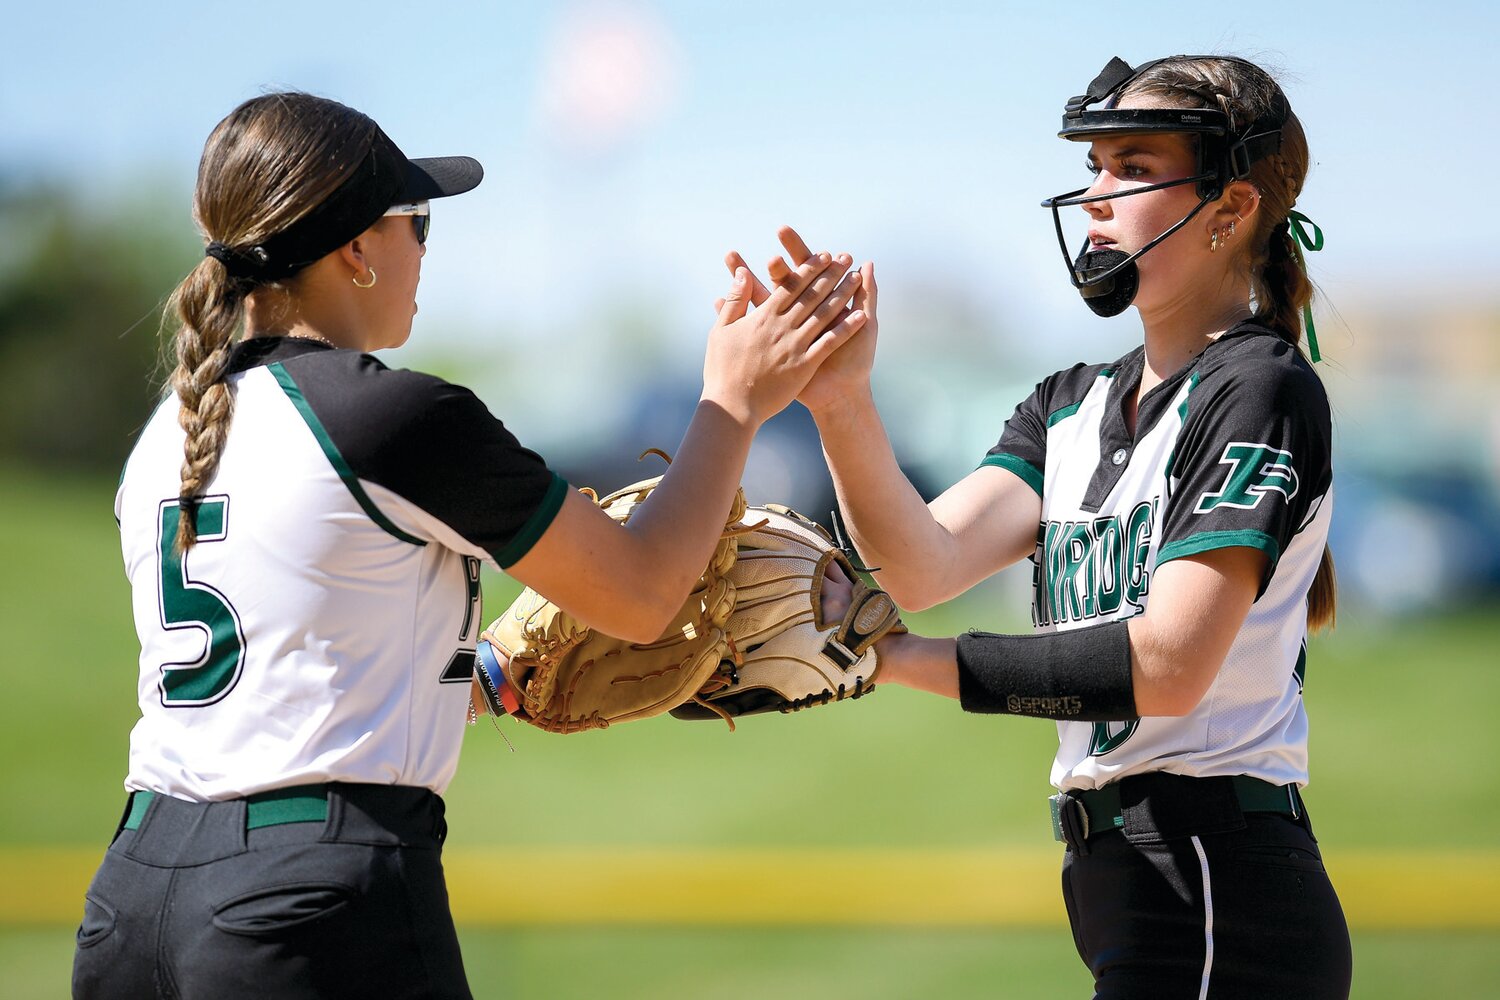 Pennridge third baseman Ryleigh Lilly high-fives pitcher Grace Helbling after one of her 19 strikeouts during Monday’s 7-1 victory over Villa Joseph Marie.